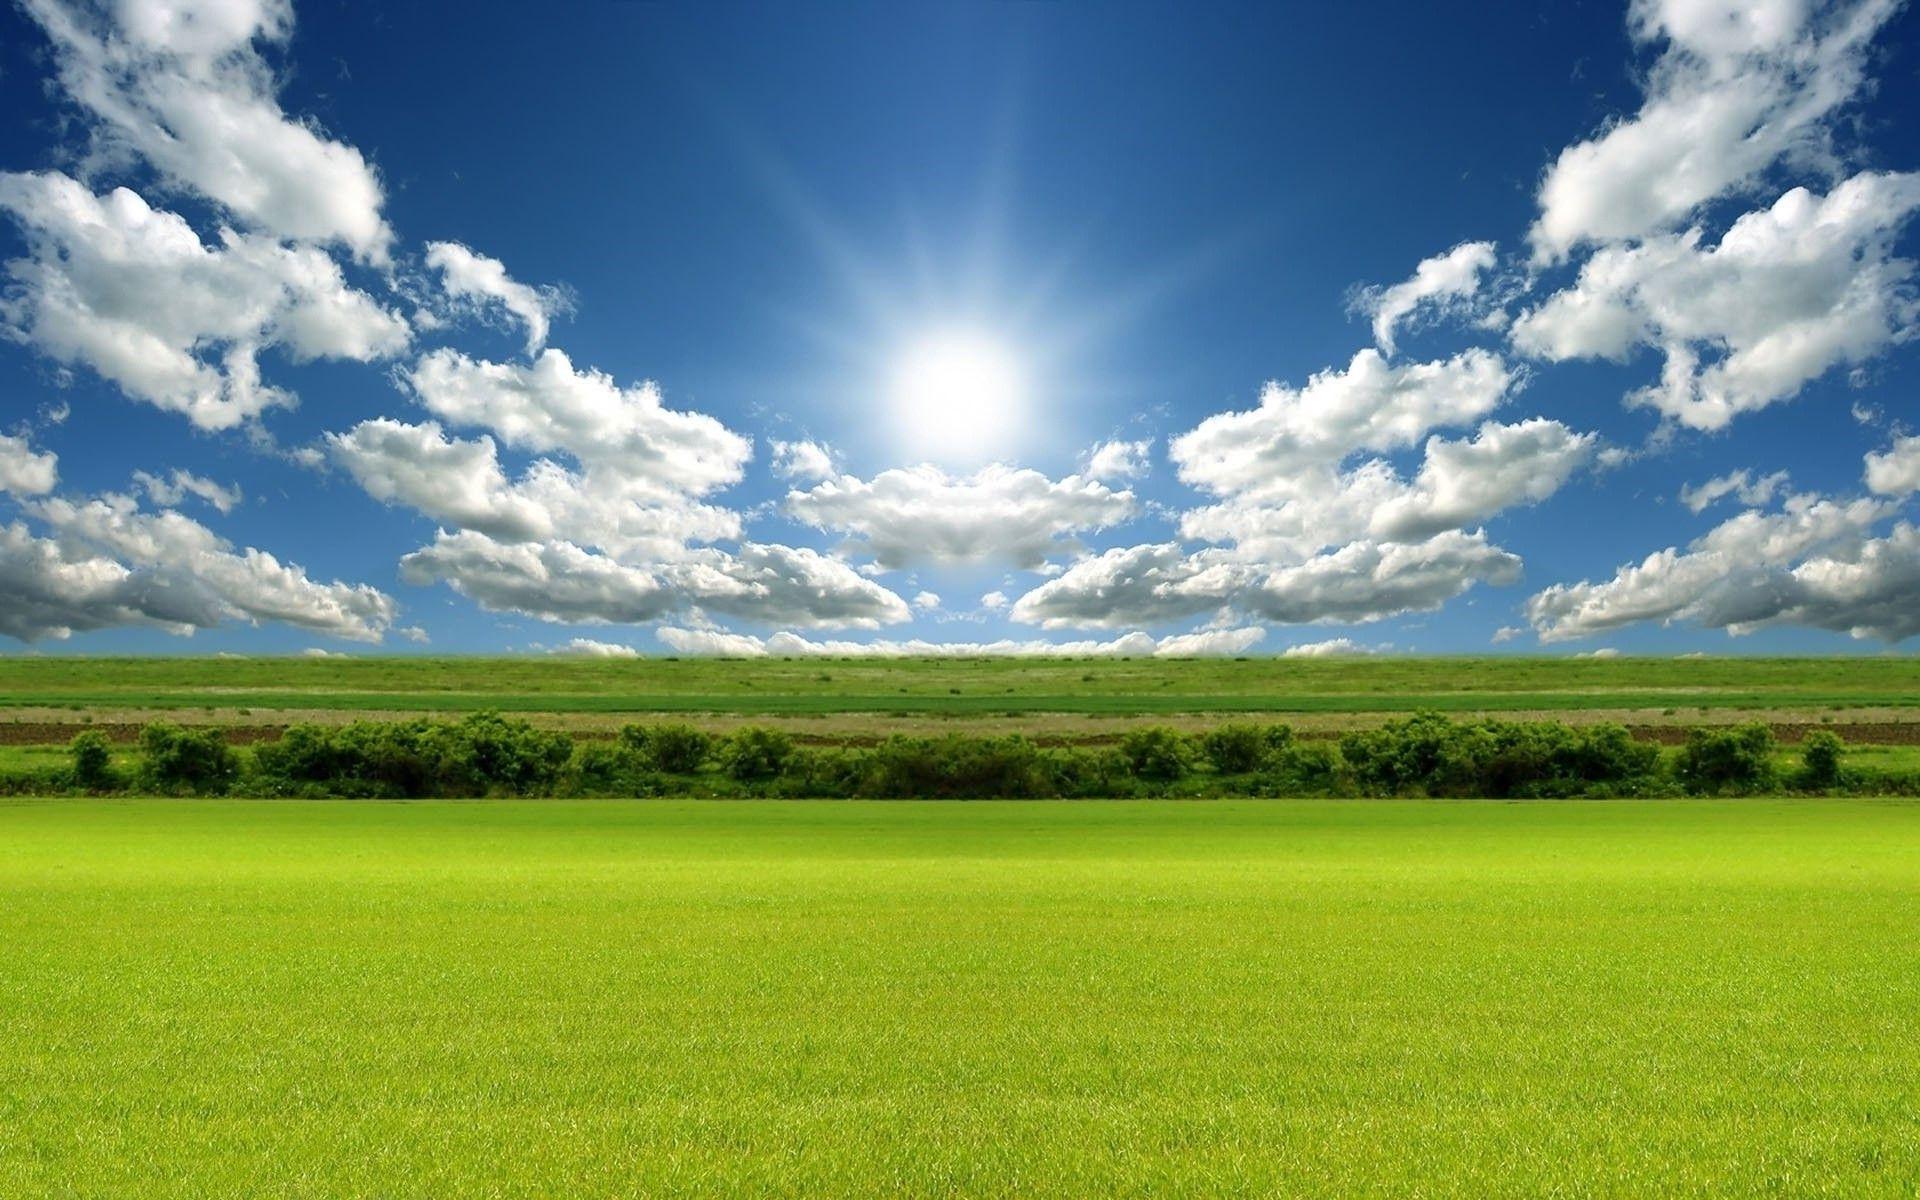 A wide green field, white clouds, blue sky. Android wallpaper for free